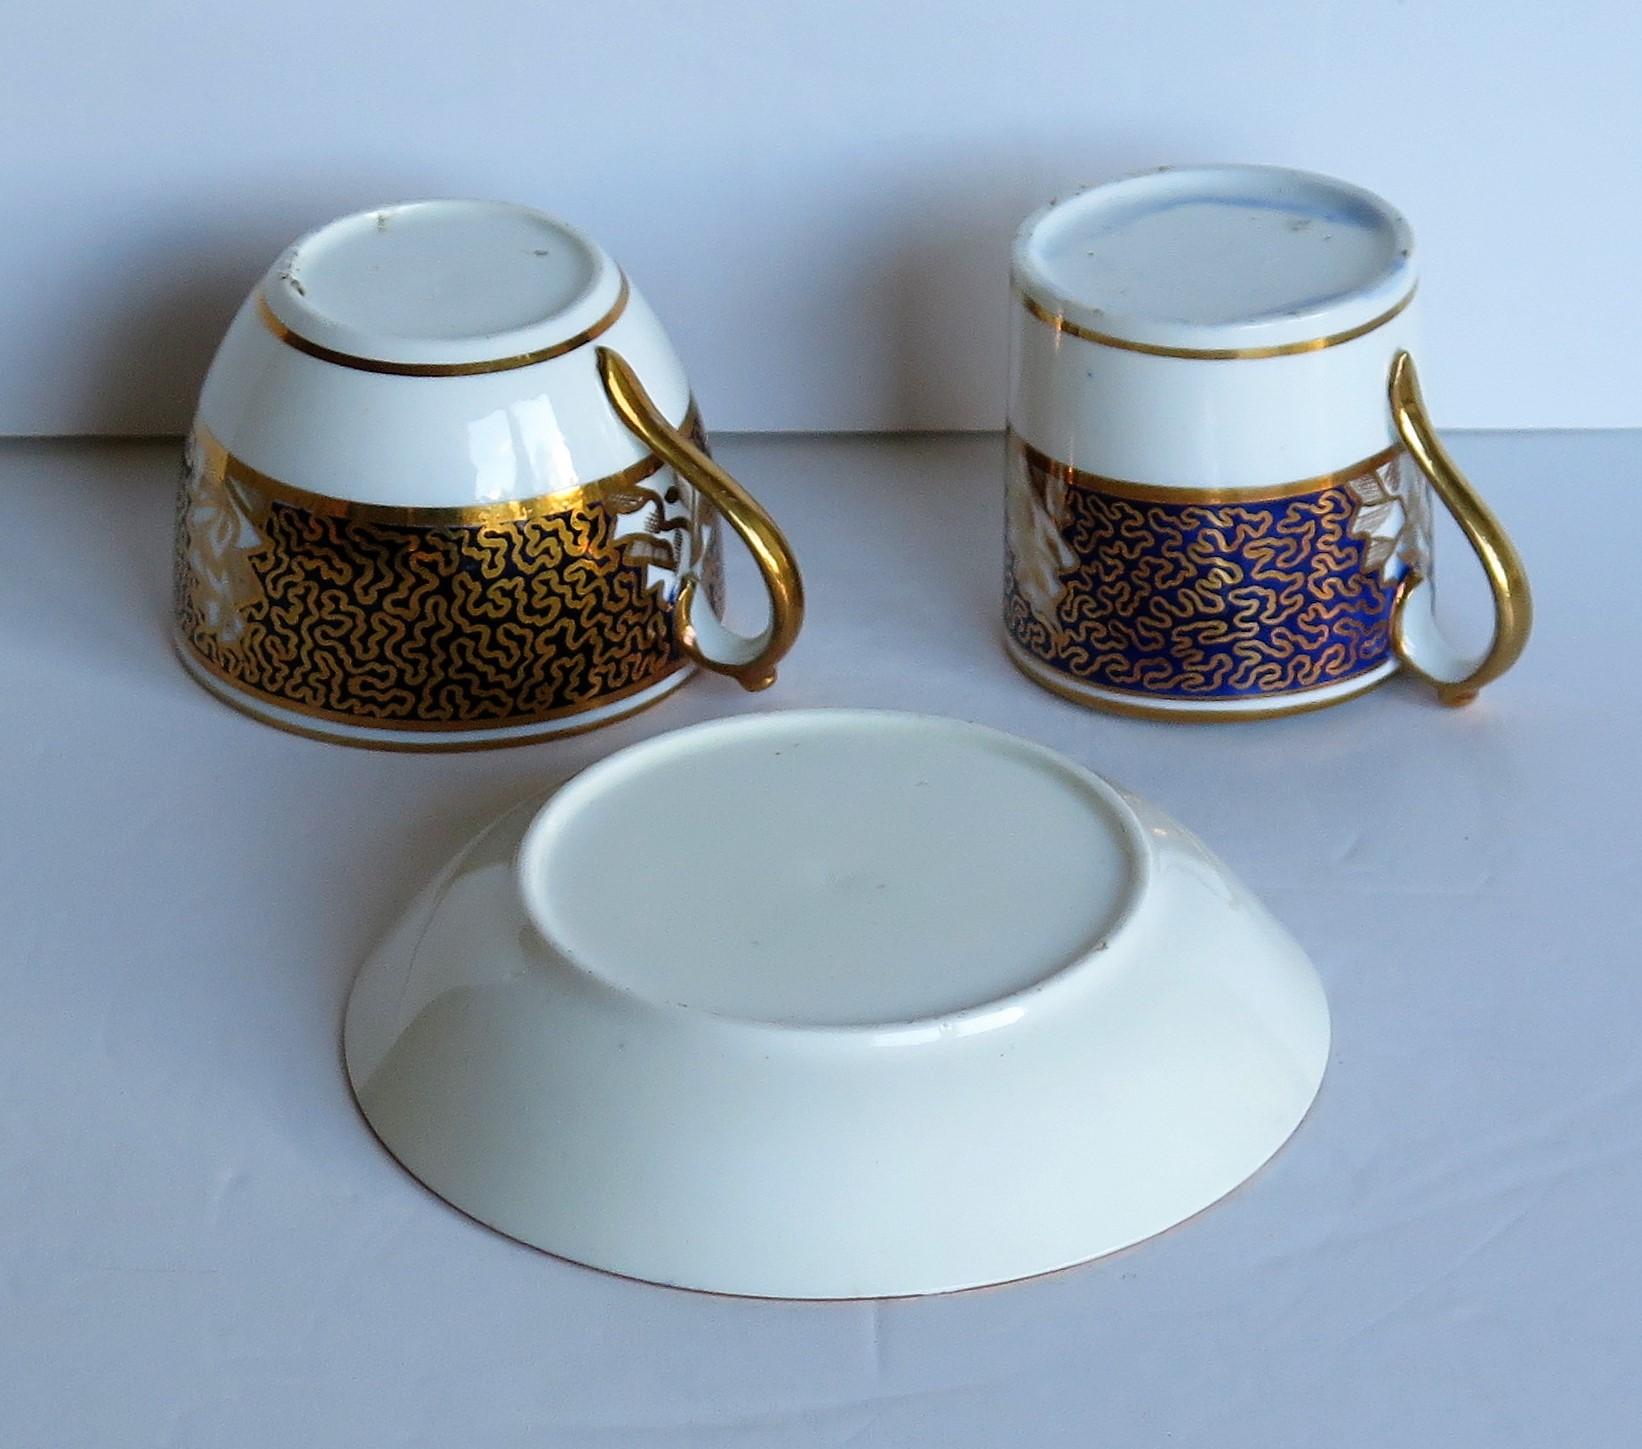 Miles Mason Porcelain Trio Finely Hand Painted & Gilded Pattern 470, circa 1808 For Sale 7